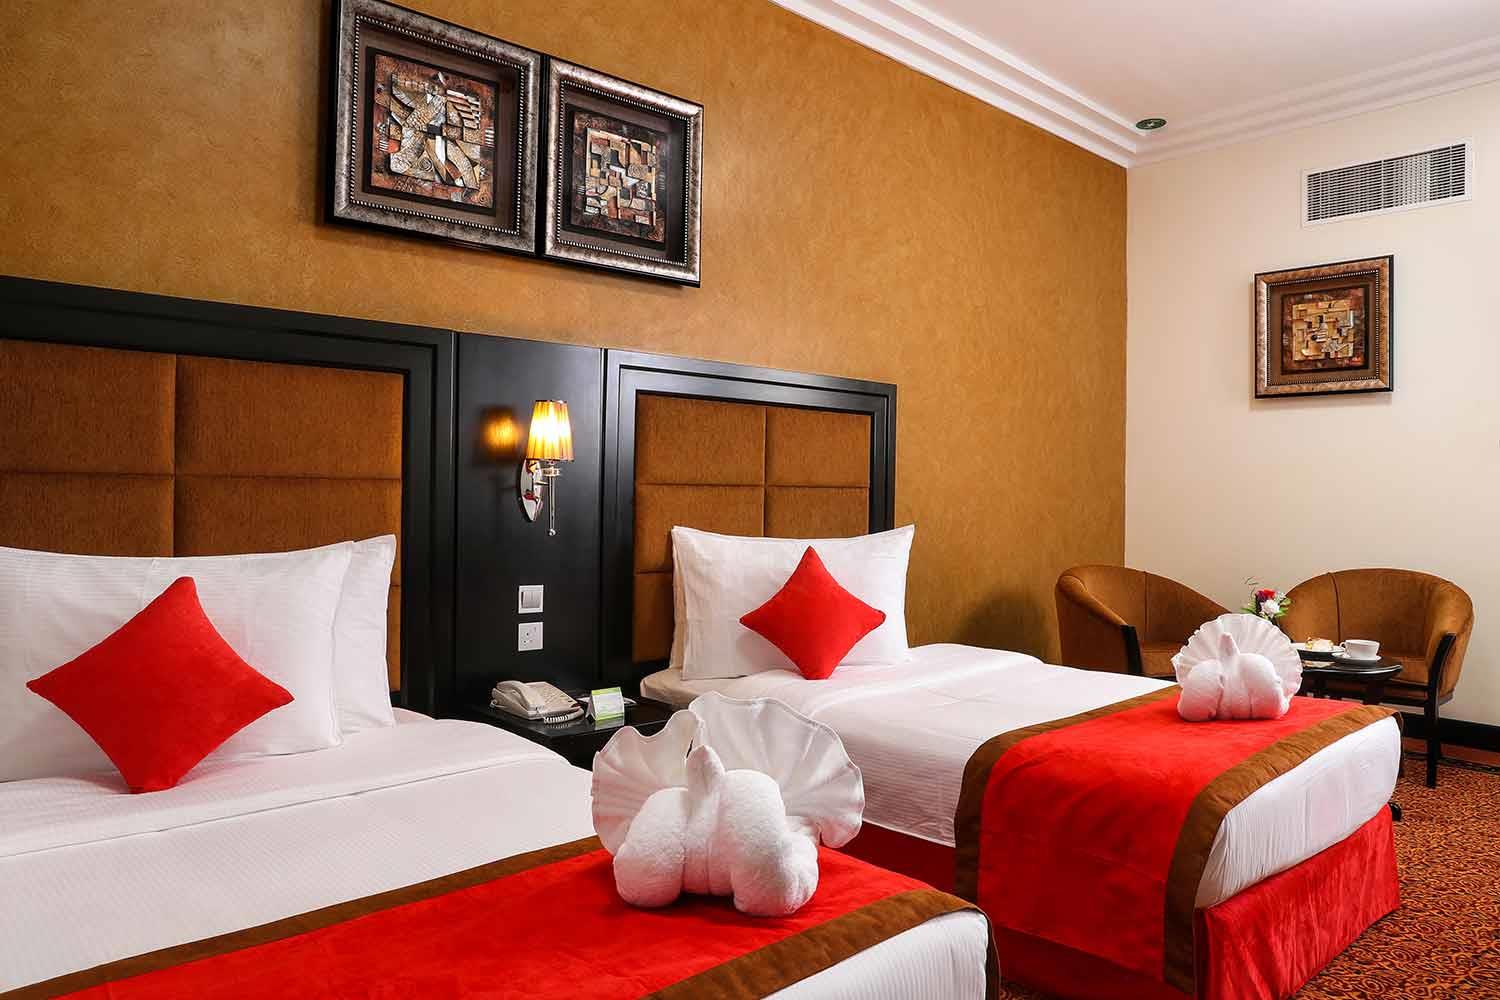 Royal Grand Suite Hotel 4*